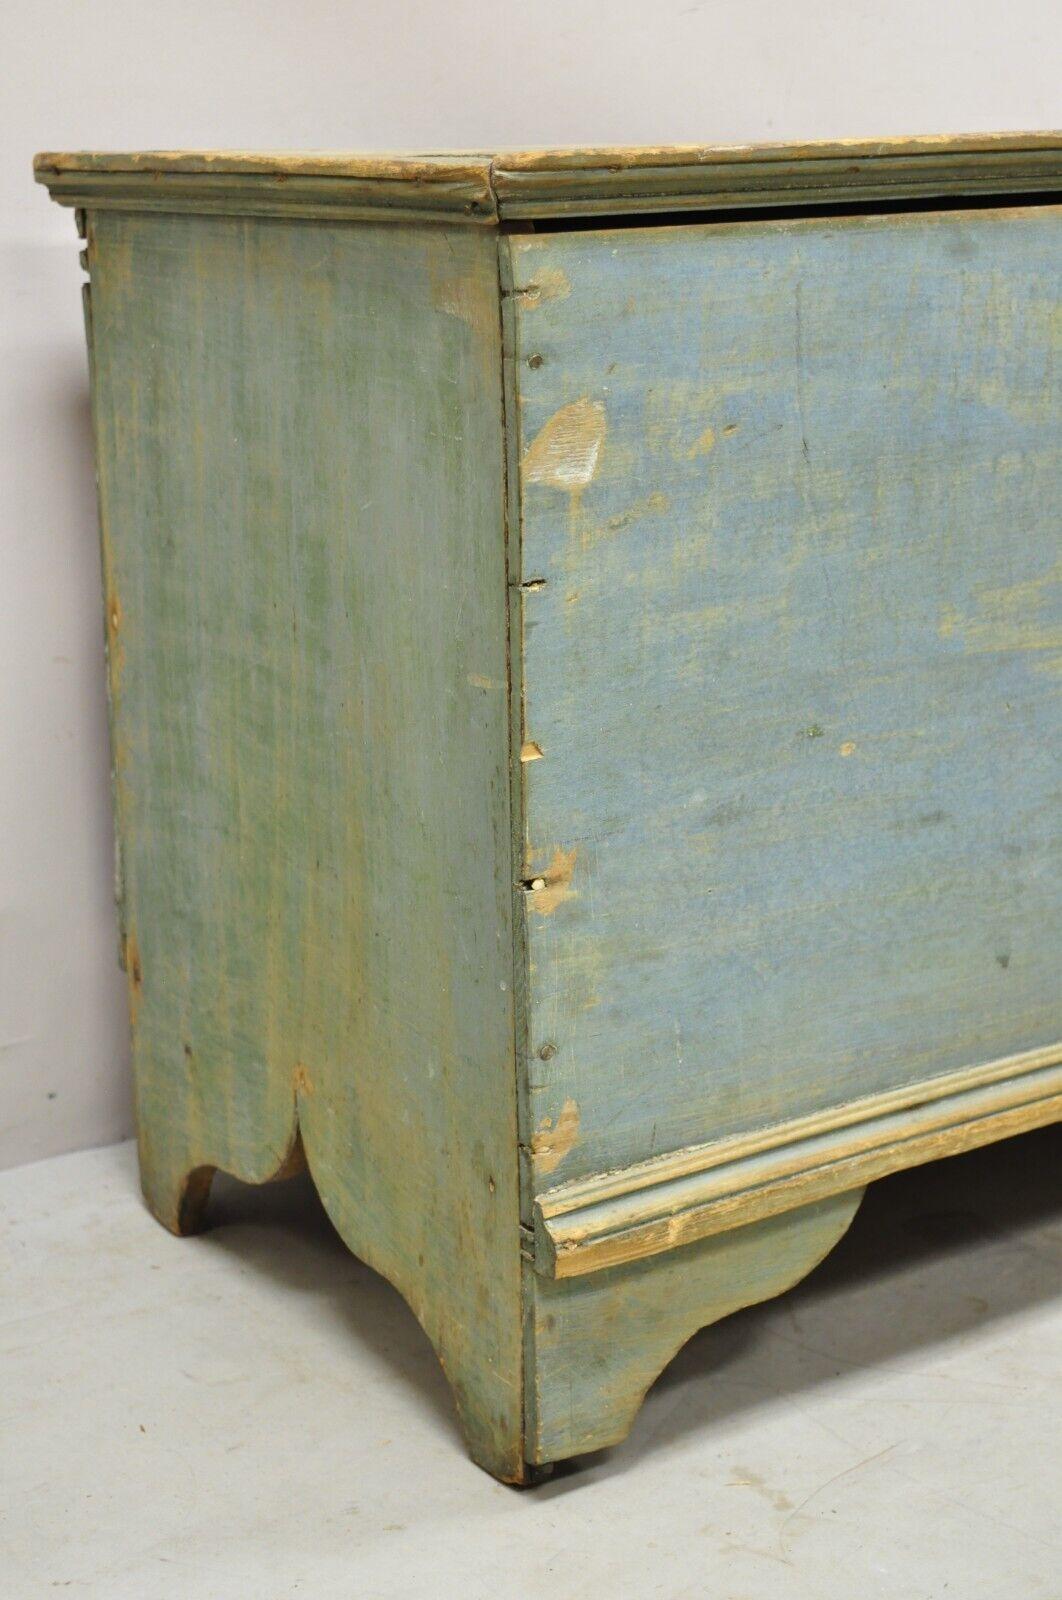 Primitive Antique 19th C Blue Green American Country Colonial Painted Blanket Chest Trunk